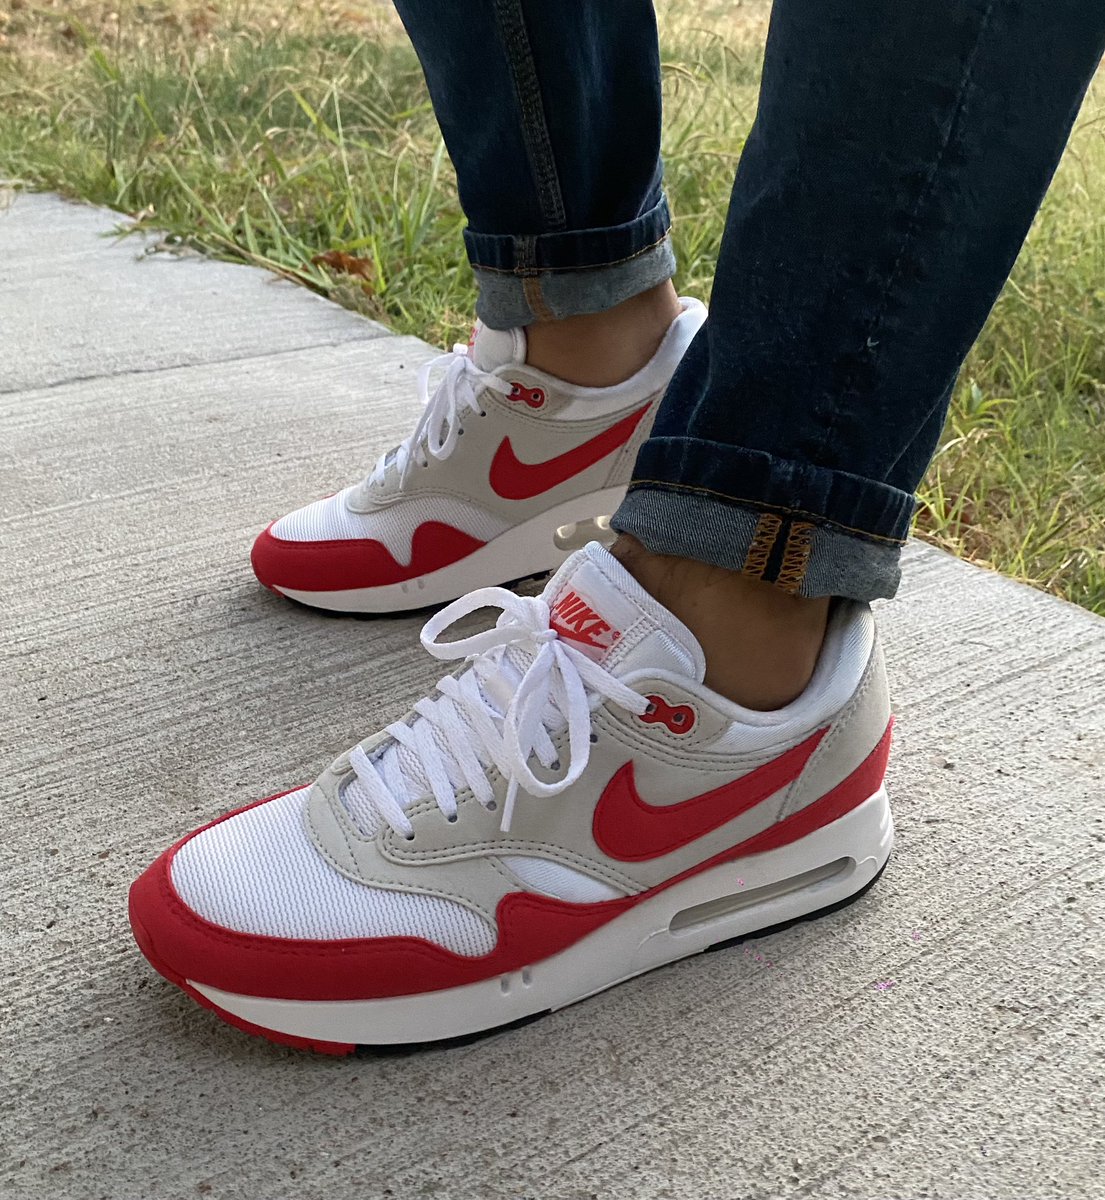 These have become my go to sneakers for long days walking around at work! So comfortable….happy Monday fam! Stay cool 🥶🥶🥶  #KOTD #jordan #NIKE #snkrsliveheatingup #SNKRS #JORDAN #KOTD #NIKE #SNKRSKickCheck #YourSneakersAreDope #airmax1 
#bigbubble 🫧🫧🫧